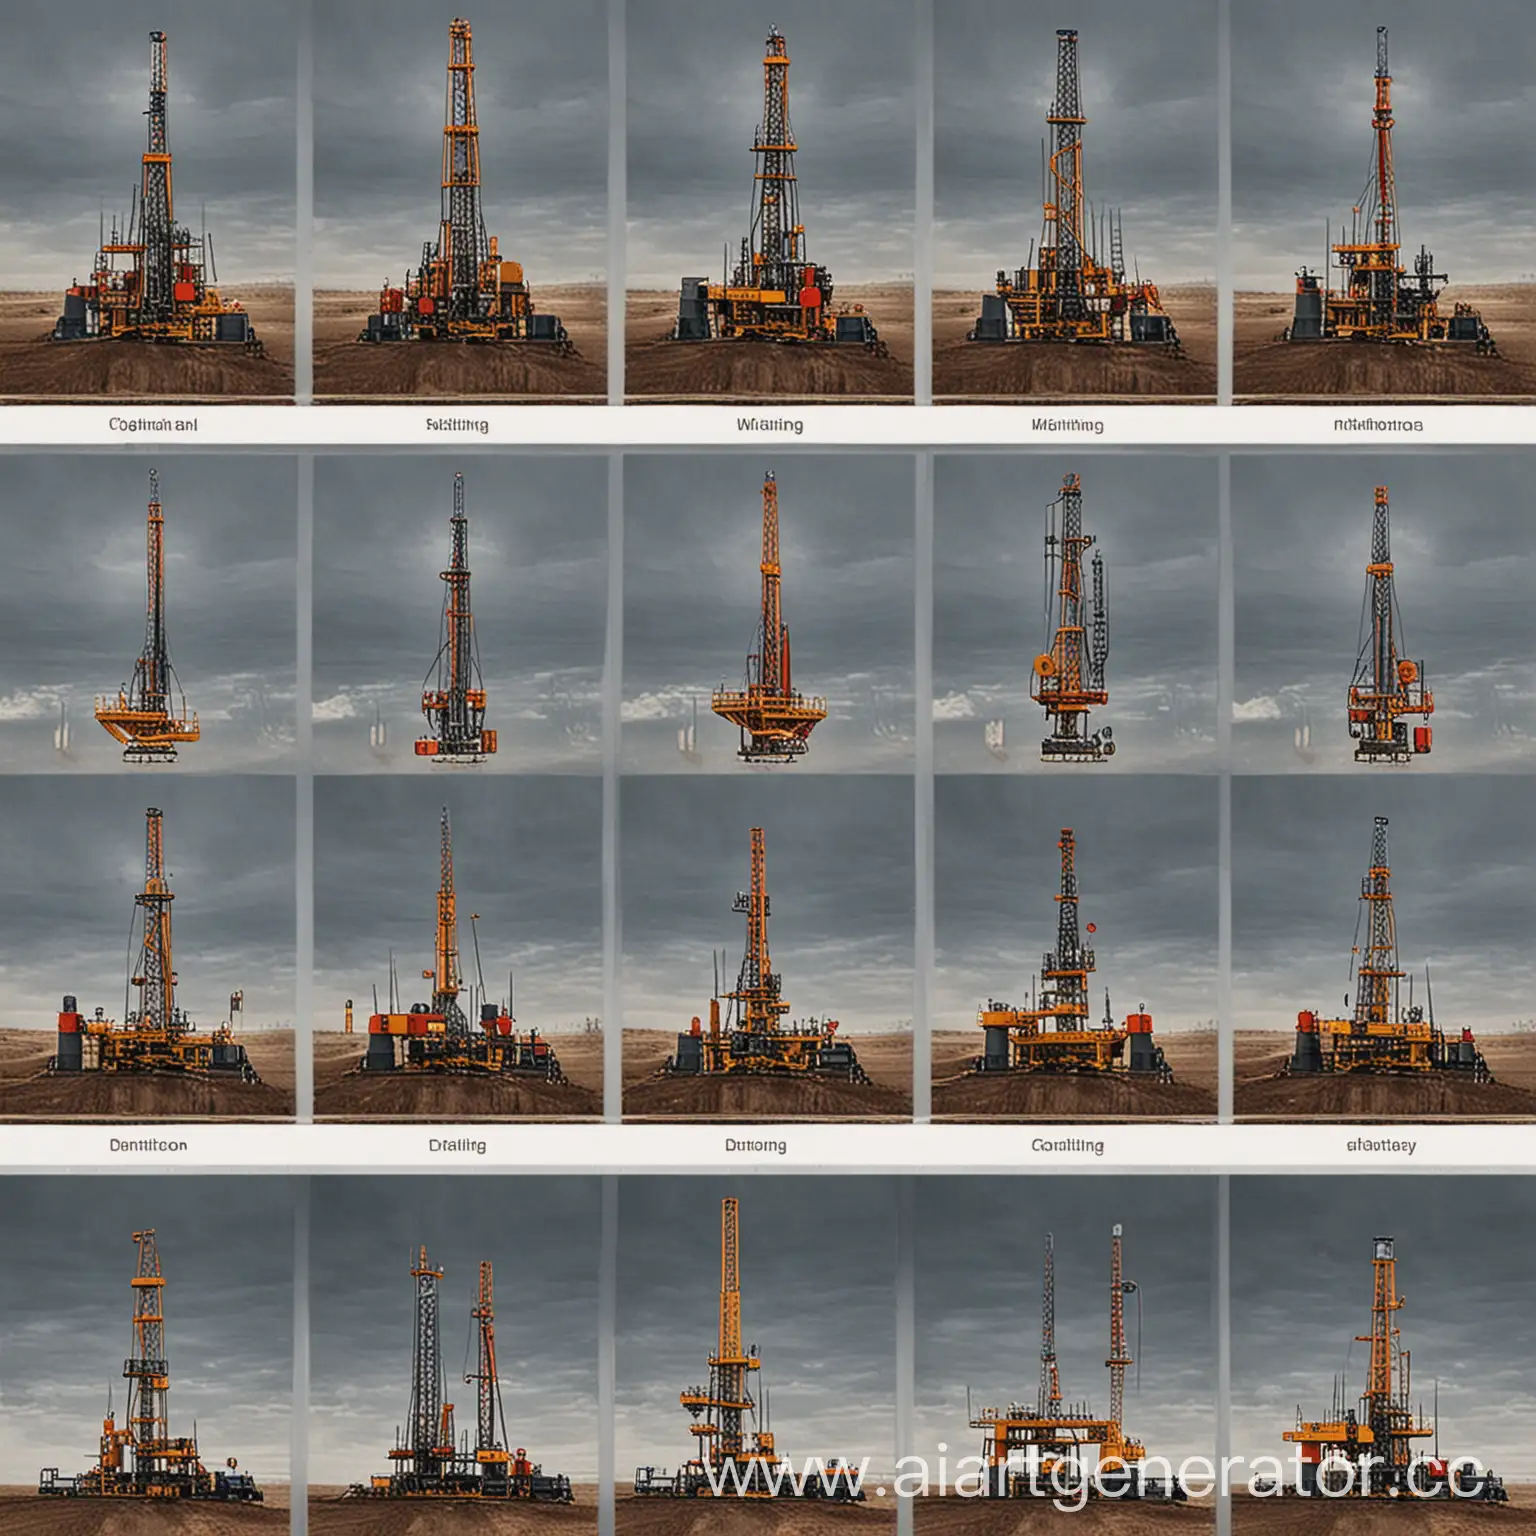 Generate 10 images on the theme of "drilling methods"